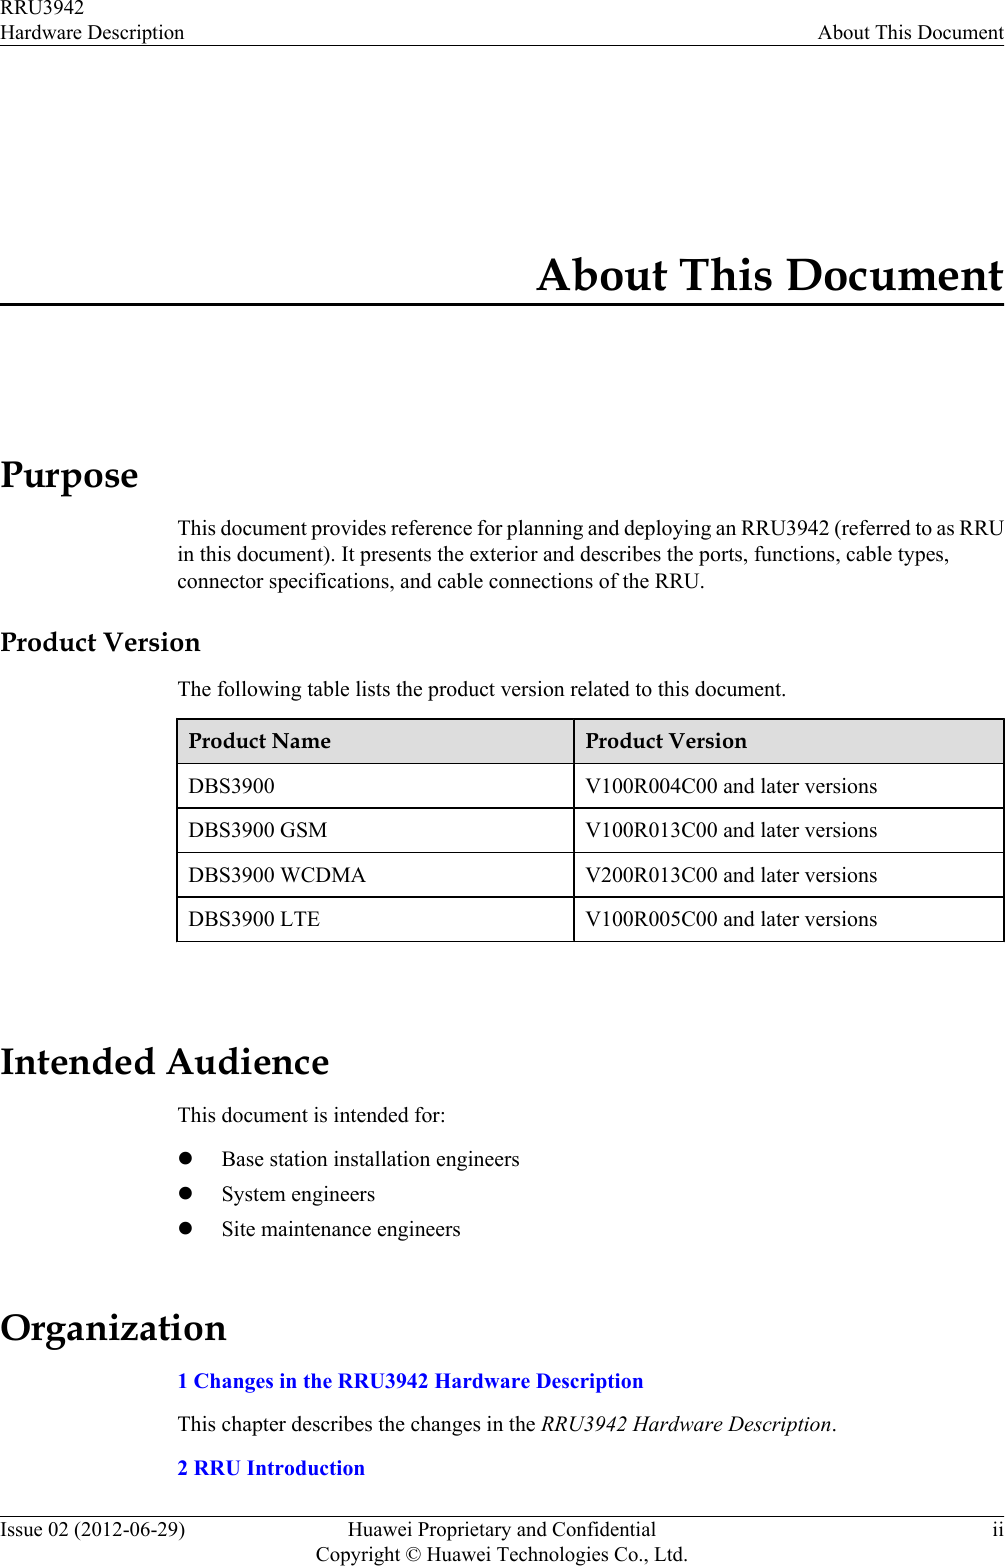 About This DocumentPurposeThis document provides reference for planning and deploying an RRU3942 (referred to as RRUin this document). It presents the exterior and describes the ports, functions, cable types,connector specifications, and cable connections of the RRU.Product VersionThe following table lists the product version related to this document.Product Name Product VersionDBS3900 V100R004C00 and later versionsDBS3900 GSM V100R013C00 and later versionsDBS3900 WCDMA V200R013C00 and later versionsDBS3900 LTE V100R005C00 and later versions Intended AudienceThis document is intended for:lBase station installation engineerslSystem engineerslSite maintenance engineersOrganization1 Changes in the RRU3942 Hardware DescriptionThis chapter describes the changes in the RRU3942 Hardware Description.2 RRU IntroductionRRU3942Hardware Description About This DocumentIssue 02 (2012-06-29) Huawei Proprietary and ConfidentialCopyright © Huawei Technologies Co., Ltd.ii